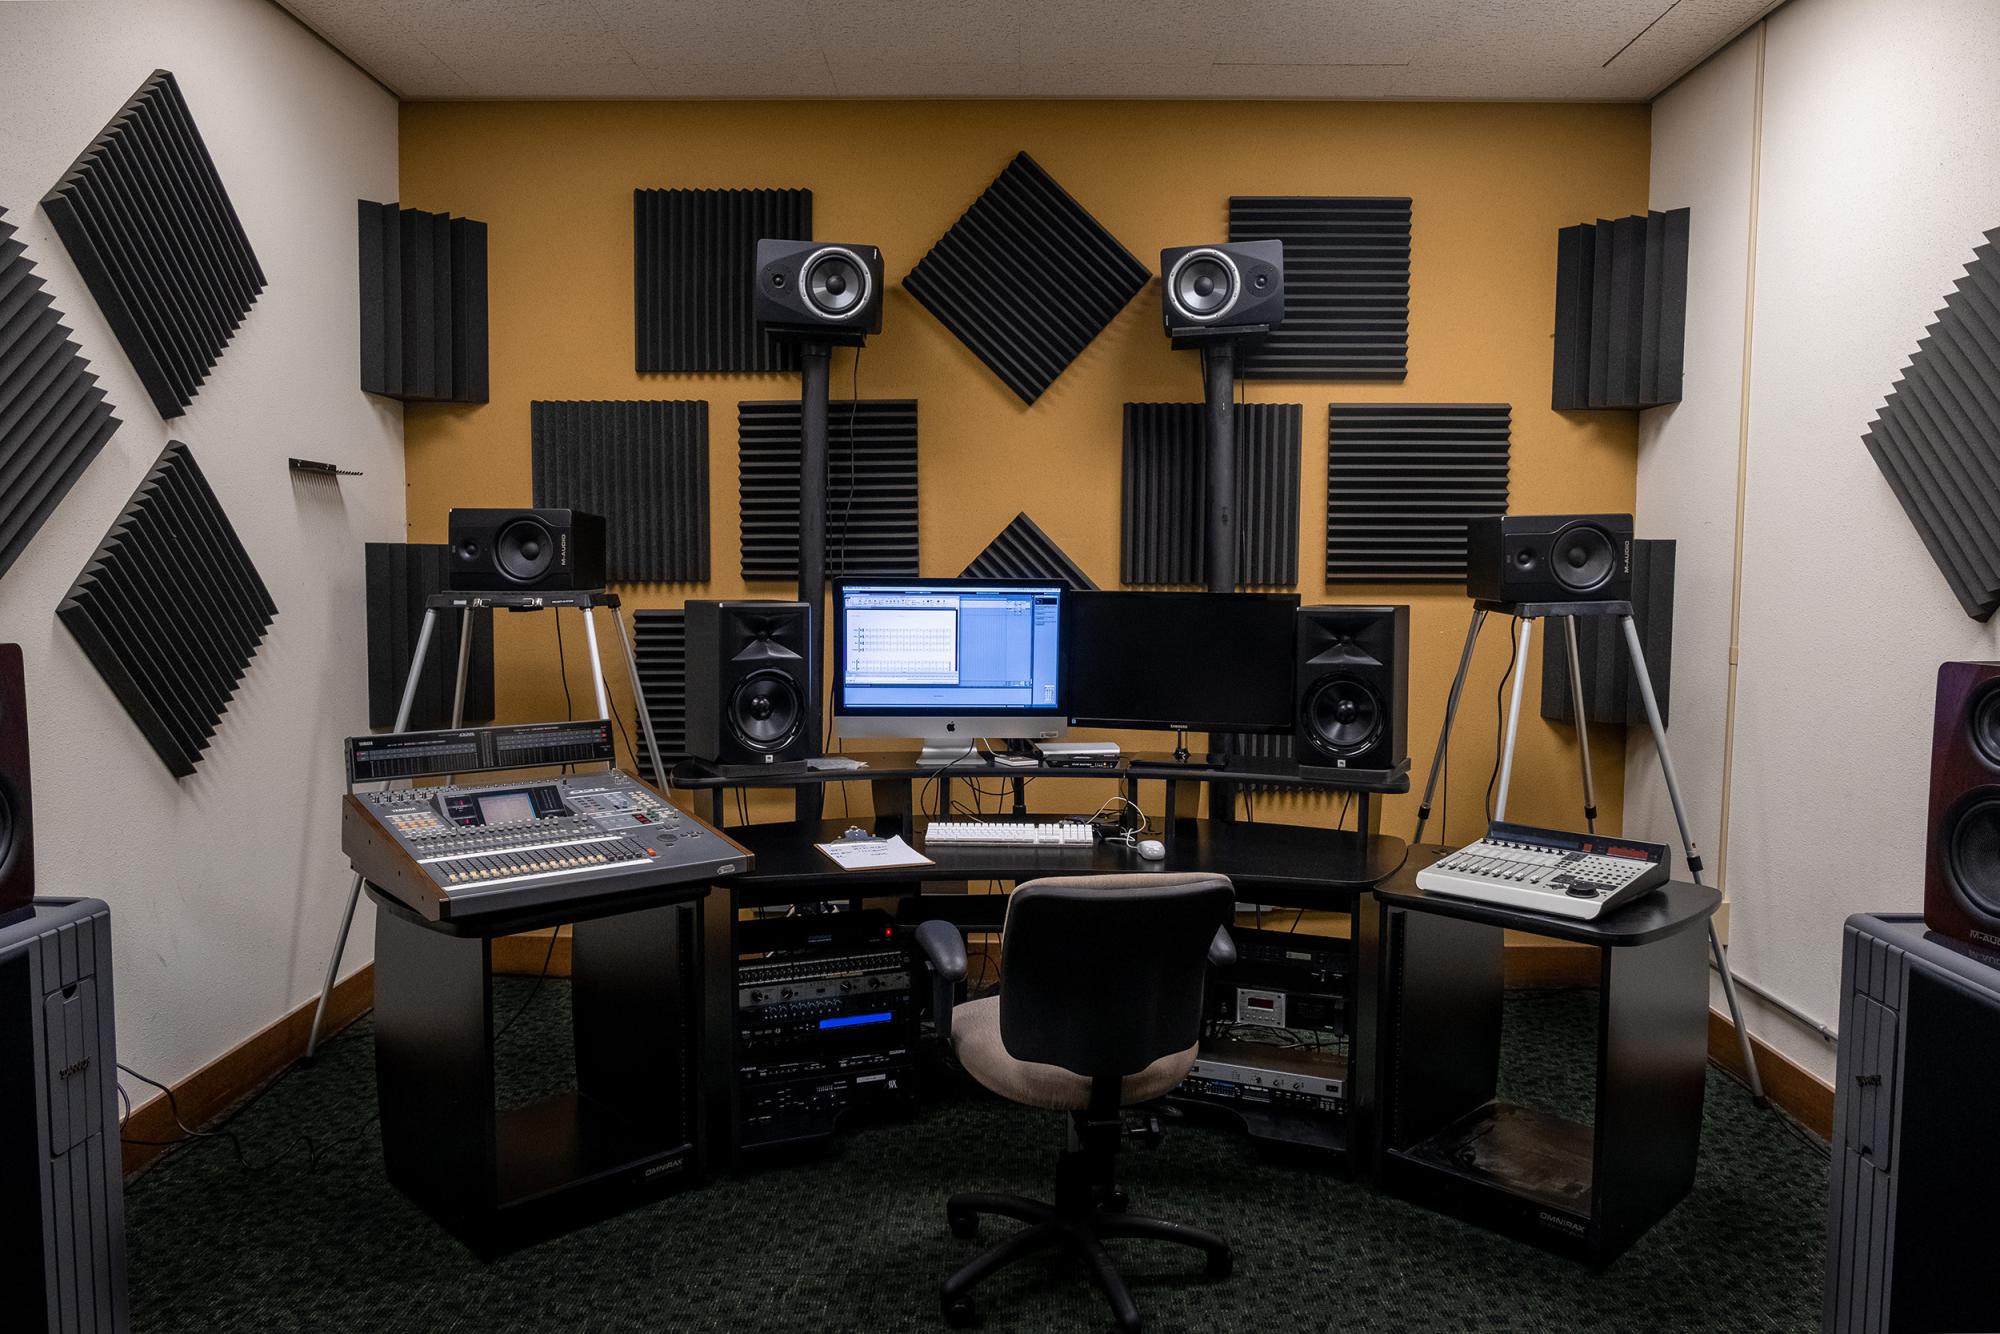 A large room lined with acoustic tiles, with an extensive amount of electronic equipment.